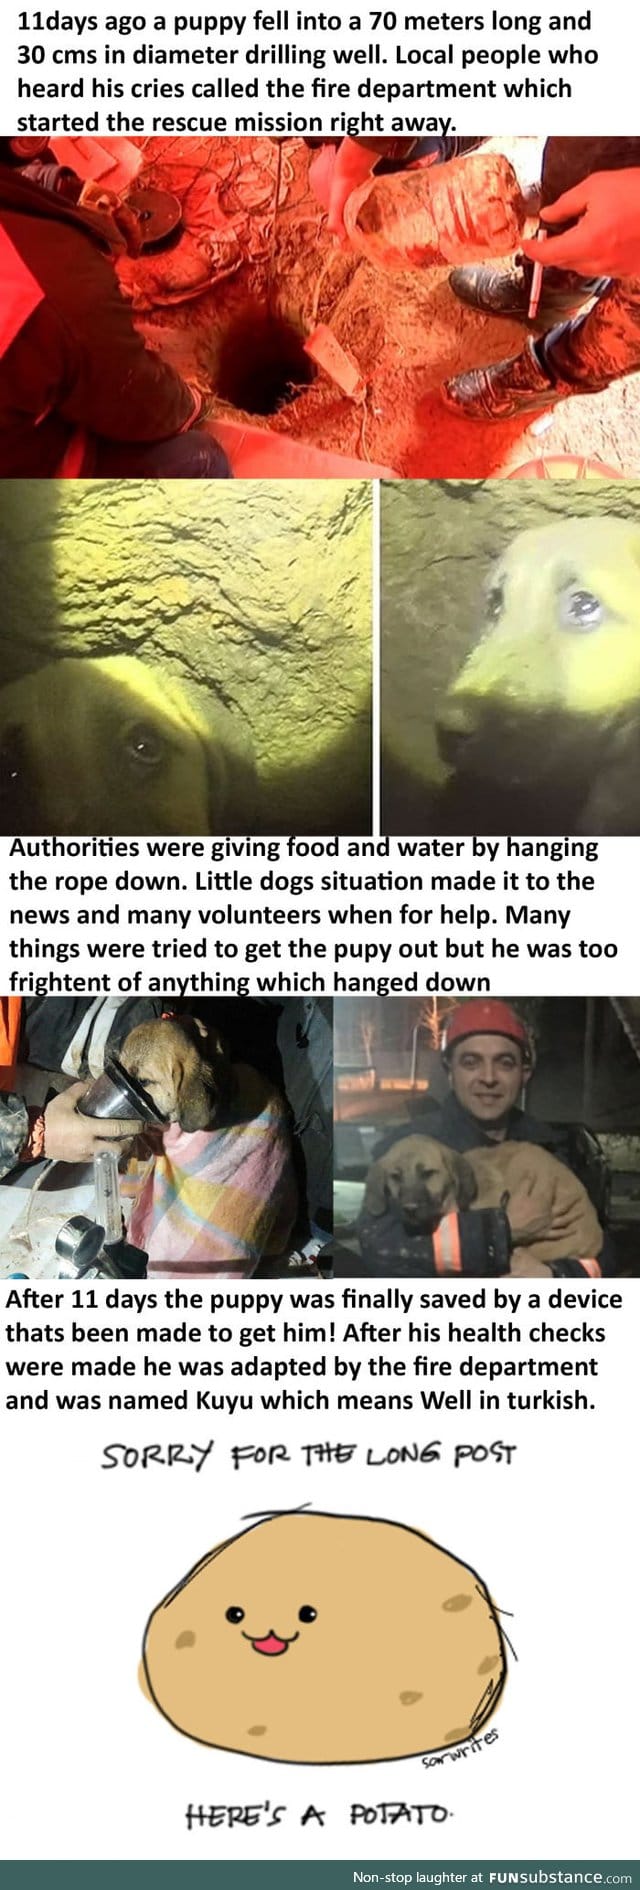 Took 11 days to rescue the puppy